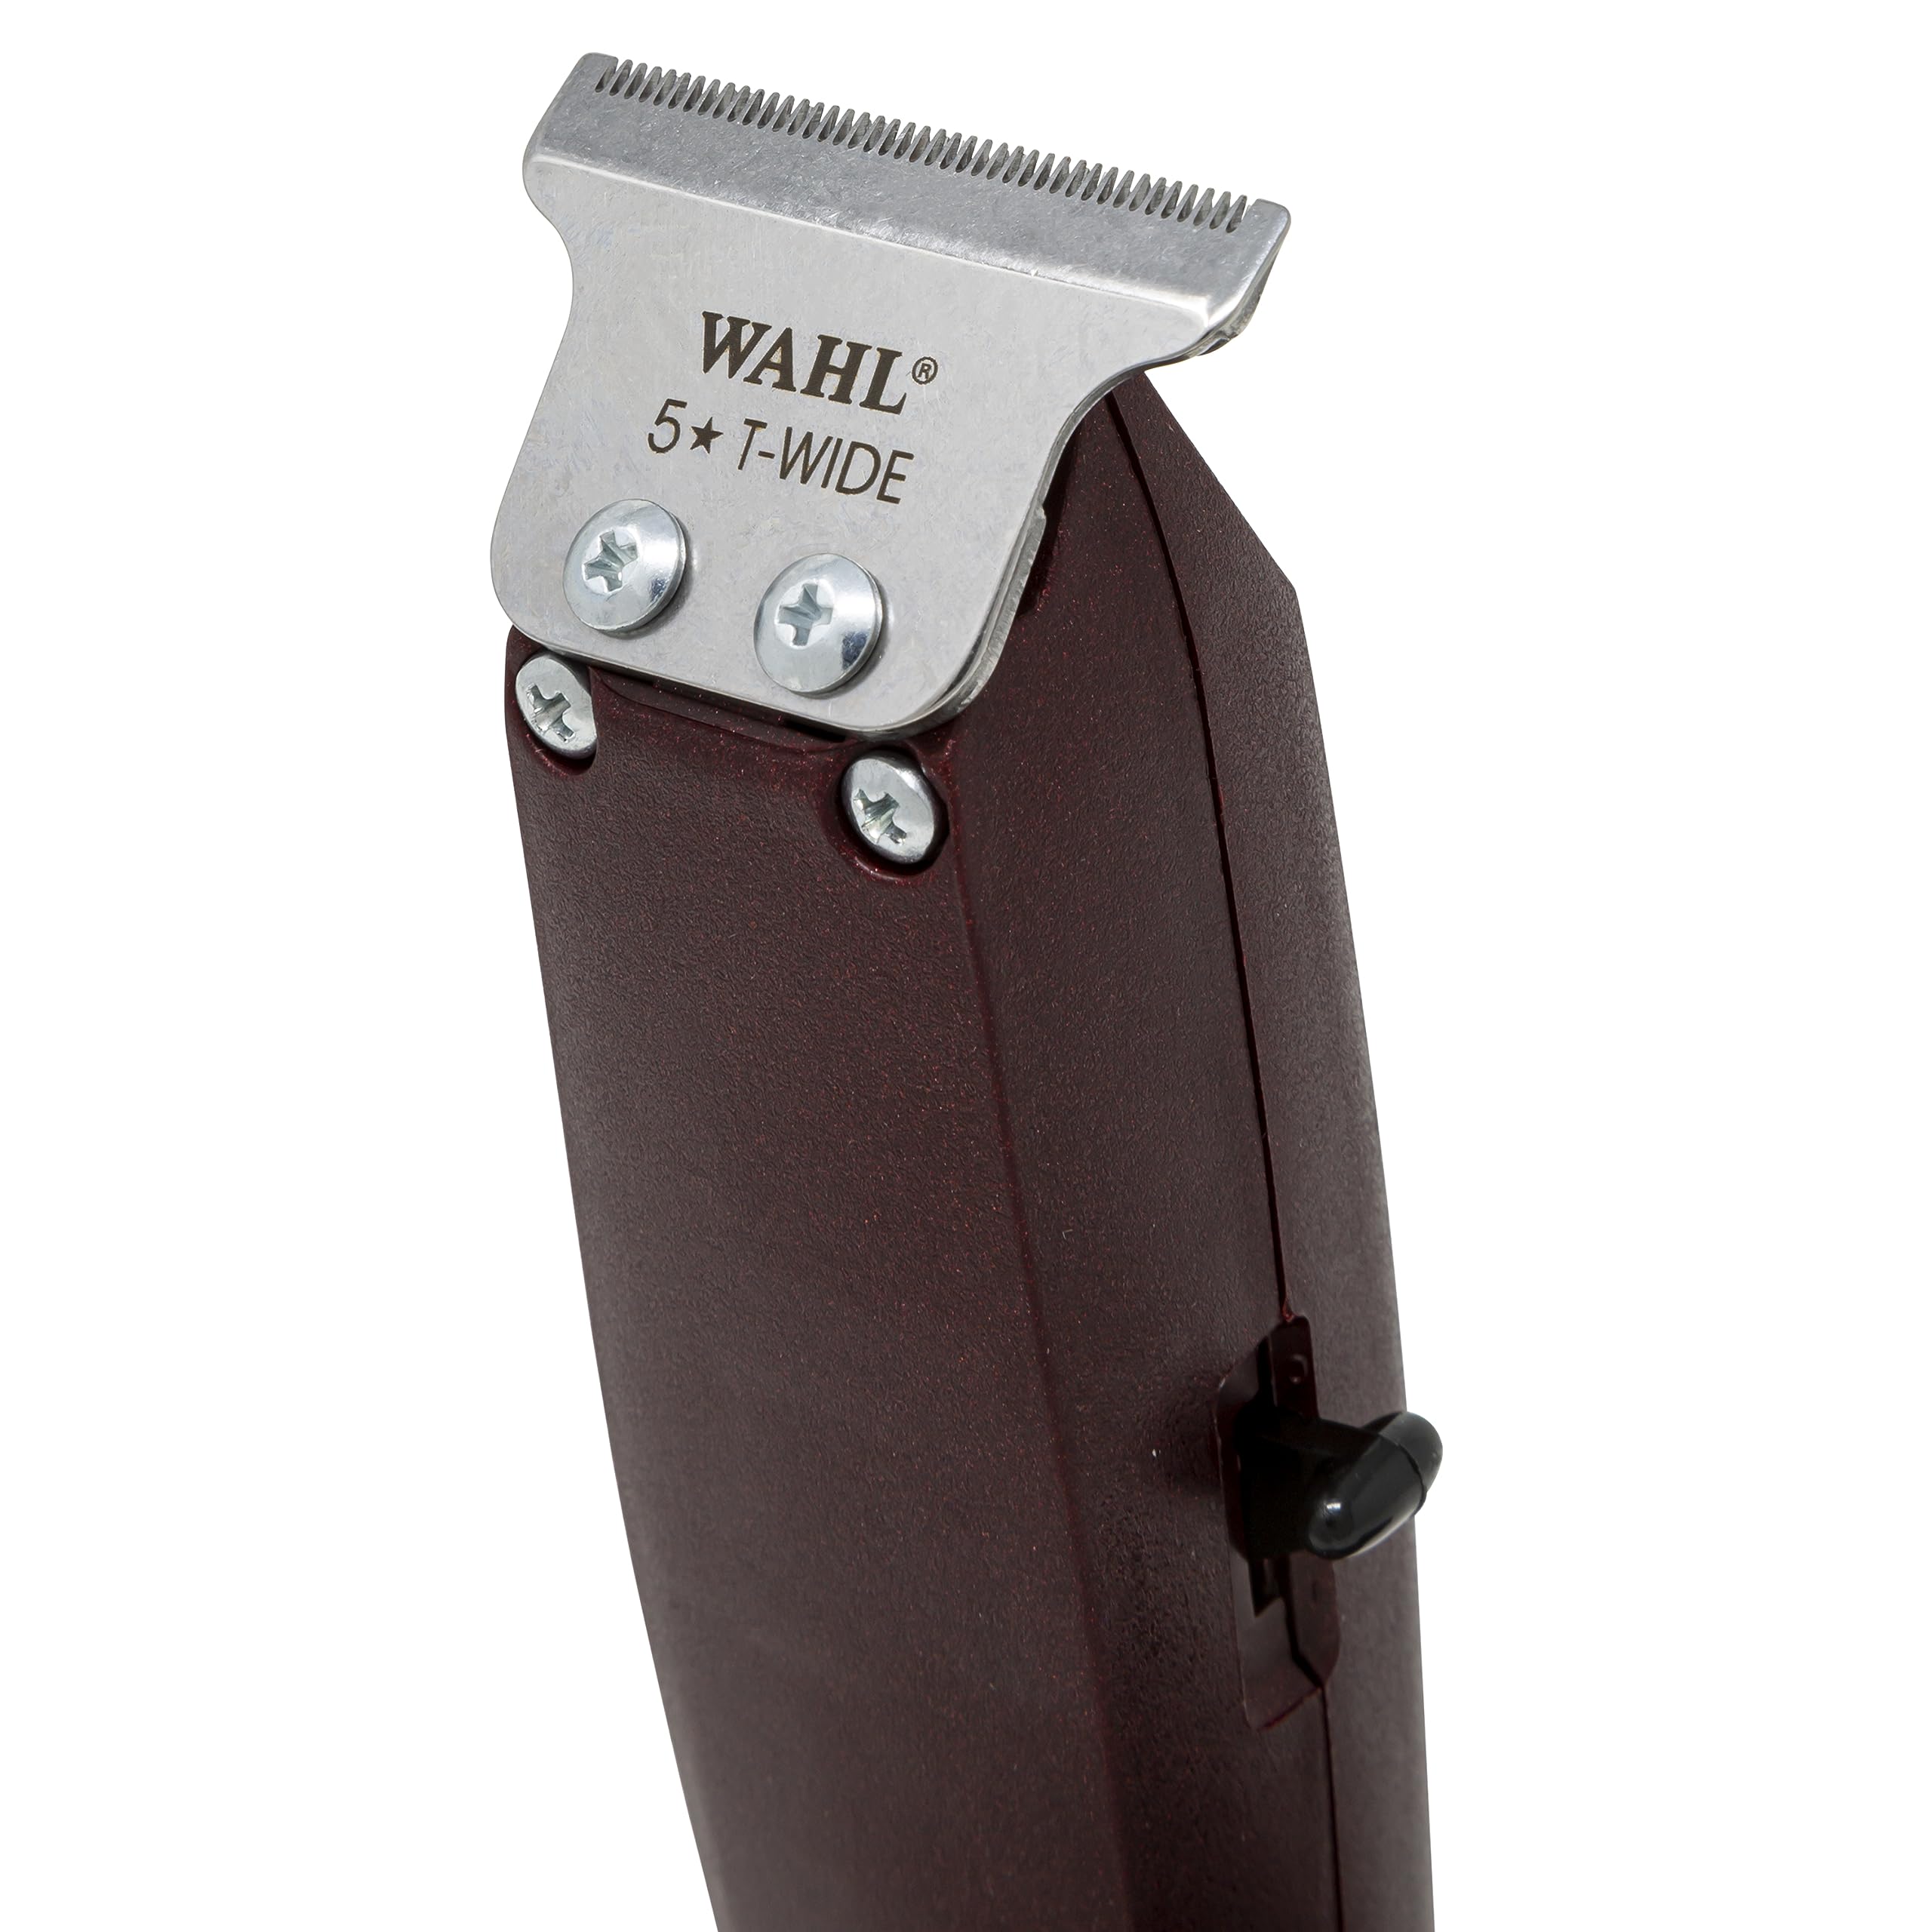 Wahl Professional- 5 Star Series Cordless Retro T-Cut Trimmer #8412 Great for Professional Stylists and Barbers 60 Minute Run Time